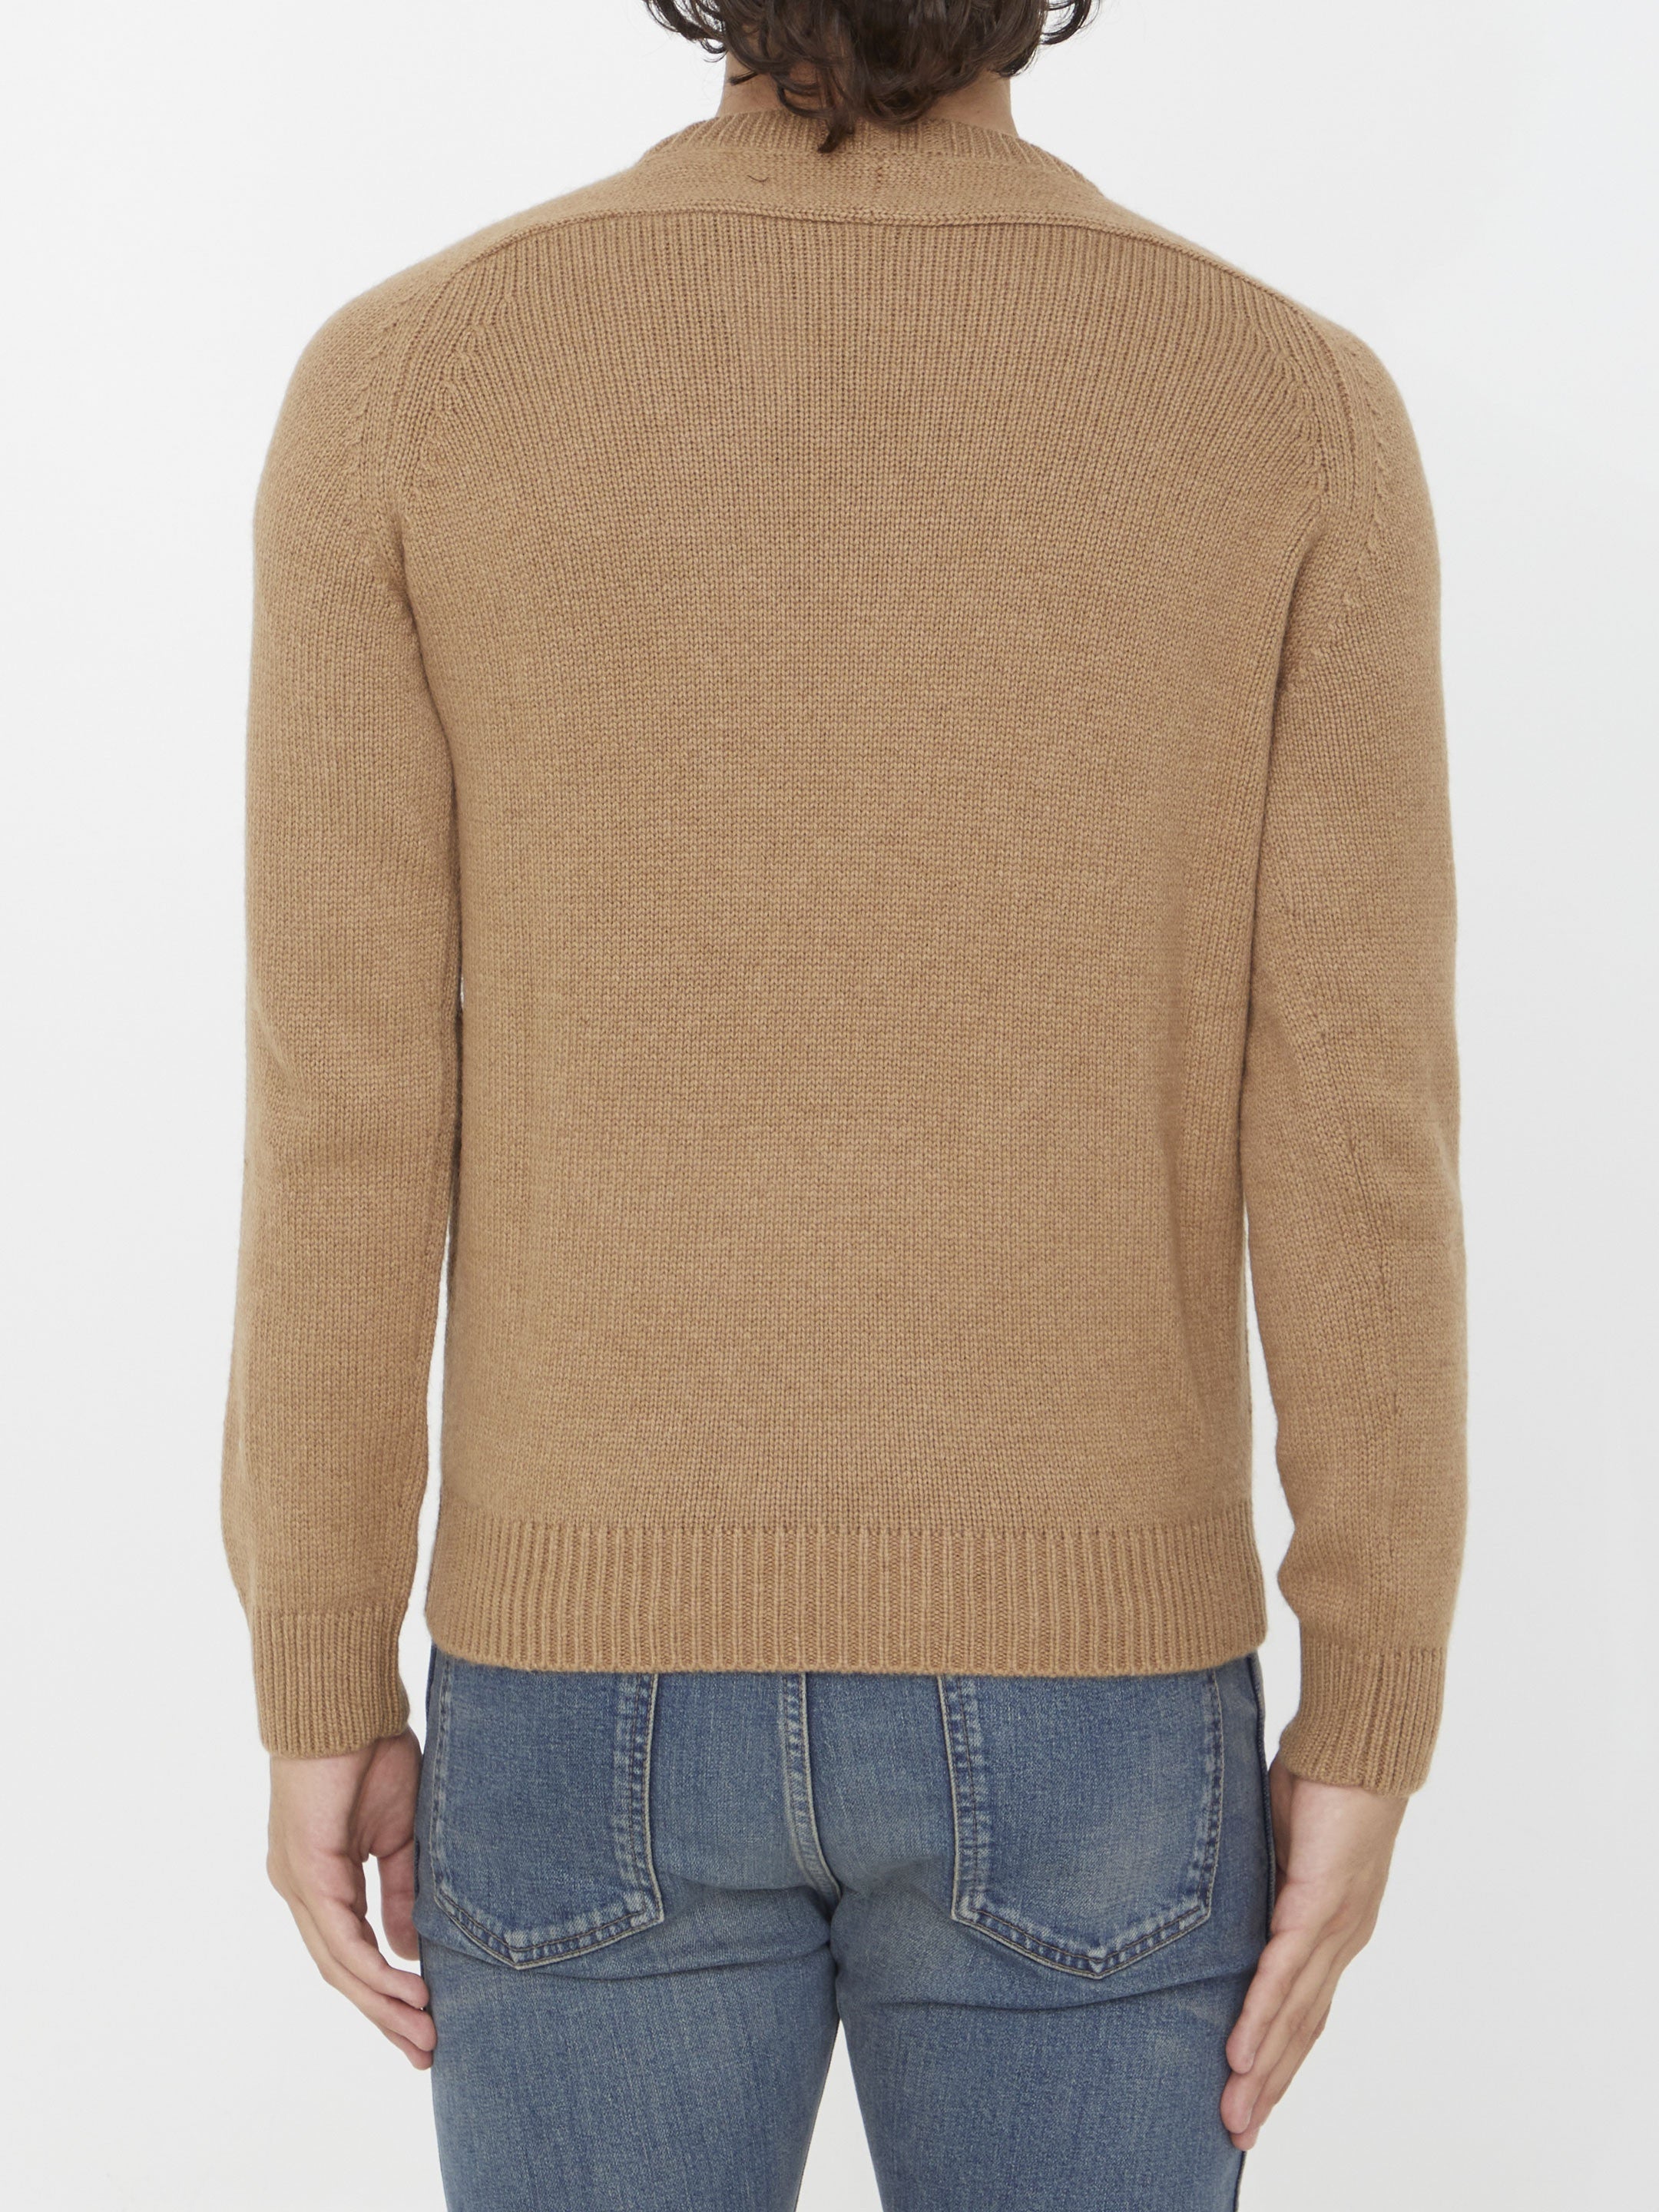 SAINT-LAURENT-OUTLET-SALE-Wool-sweater-Strick-ARCHIVE-COLLECTION-4.jpg